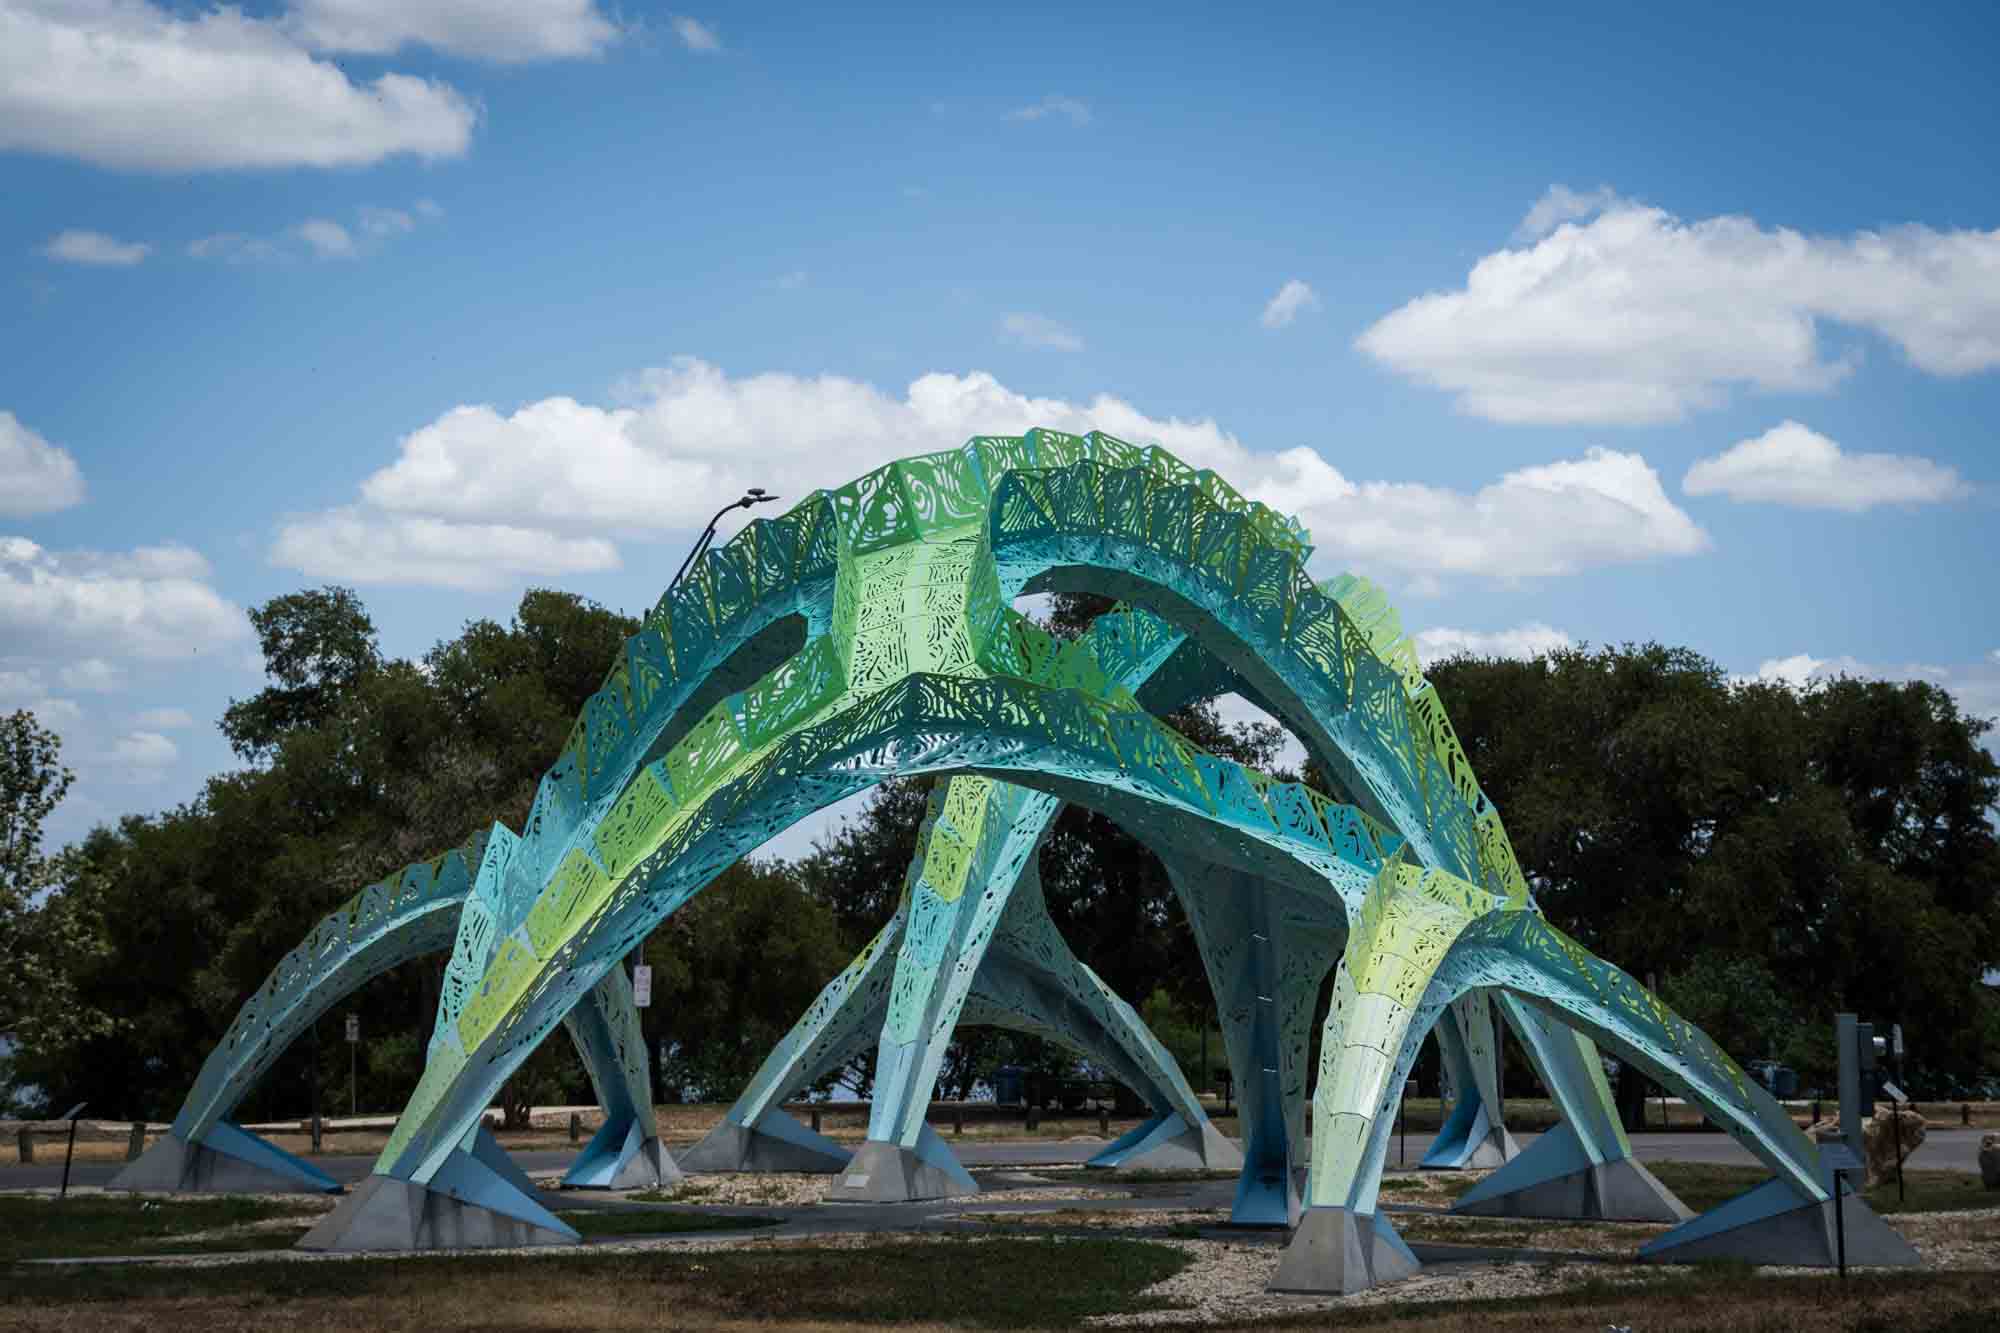 Blue and green street art project in San Antonio